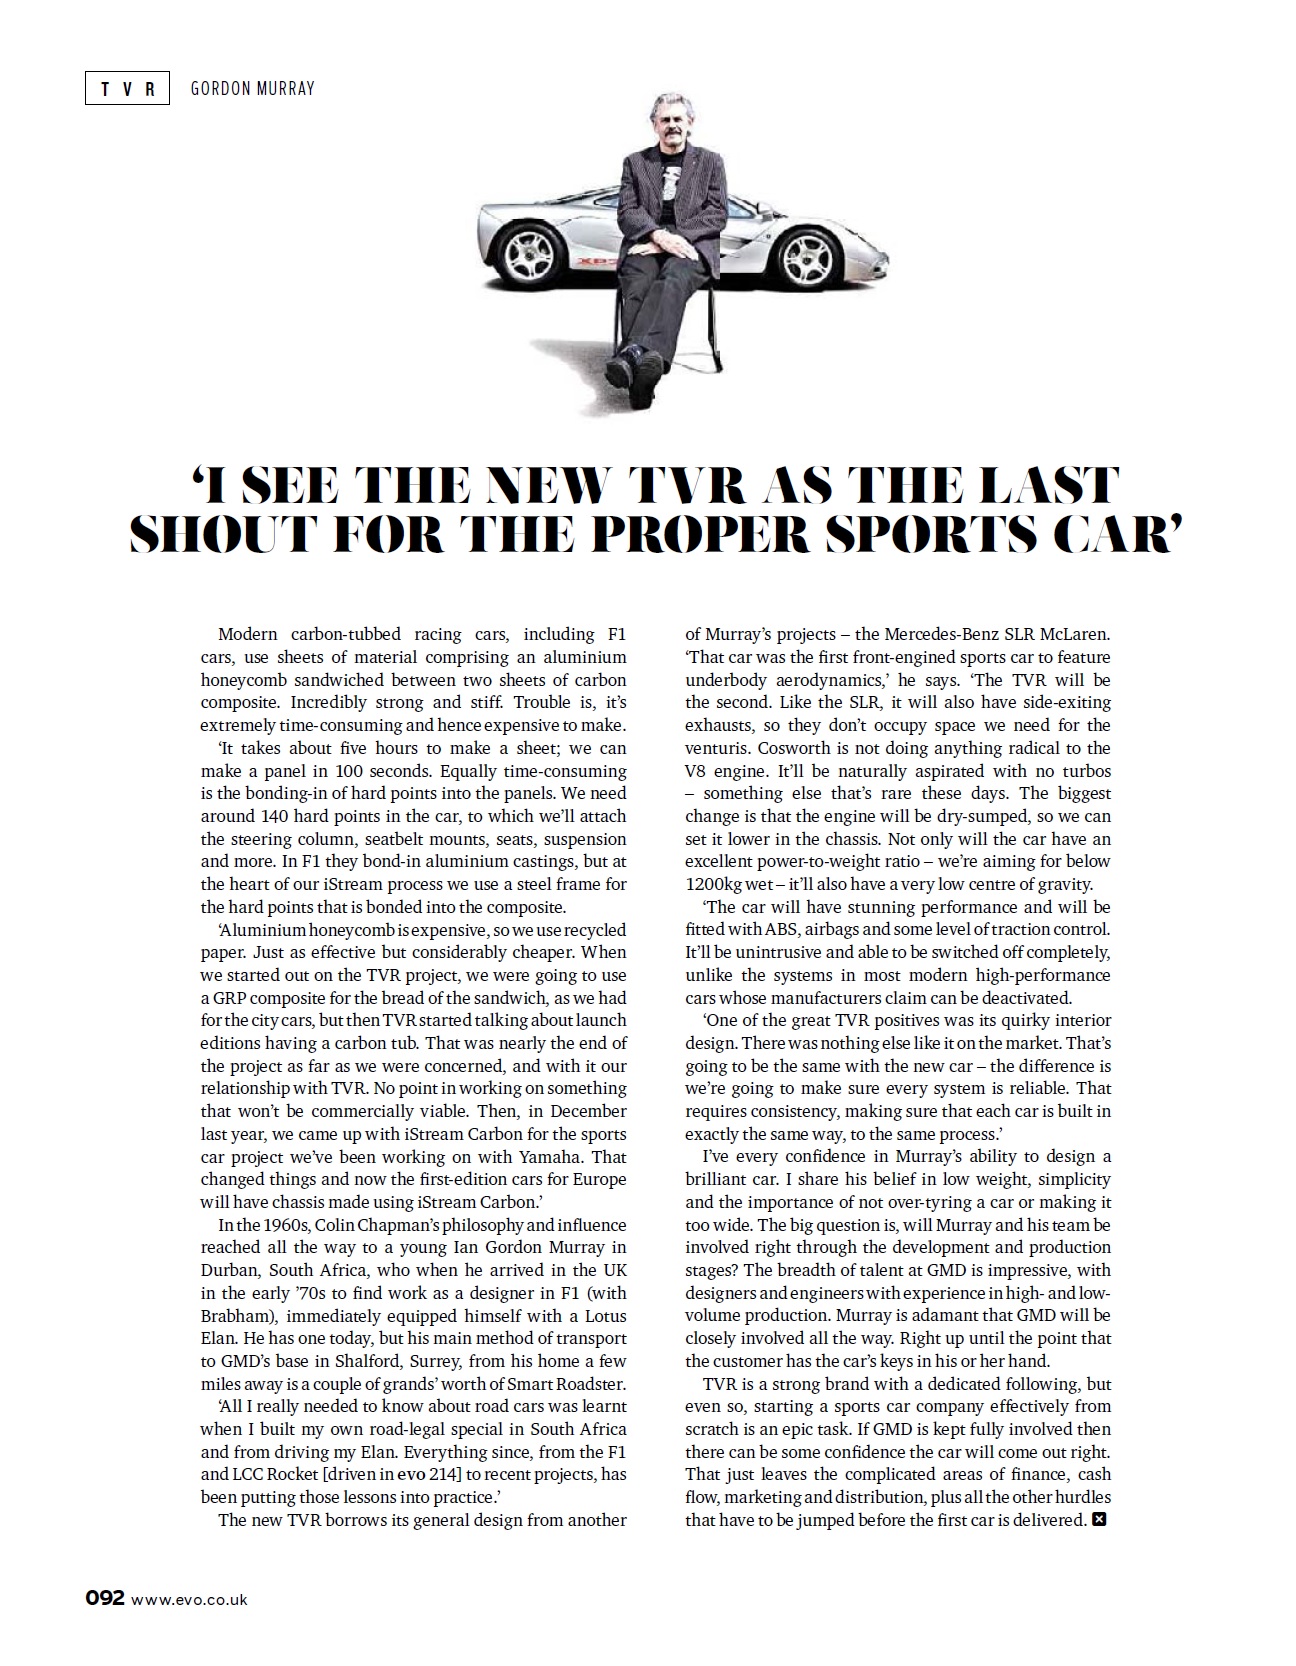 EVO - Editorial and 10 pages on TVR - Page 1 - General TVR Stuff & Gossip - PistonHeads